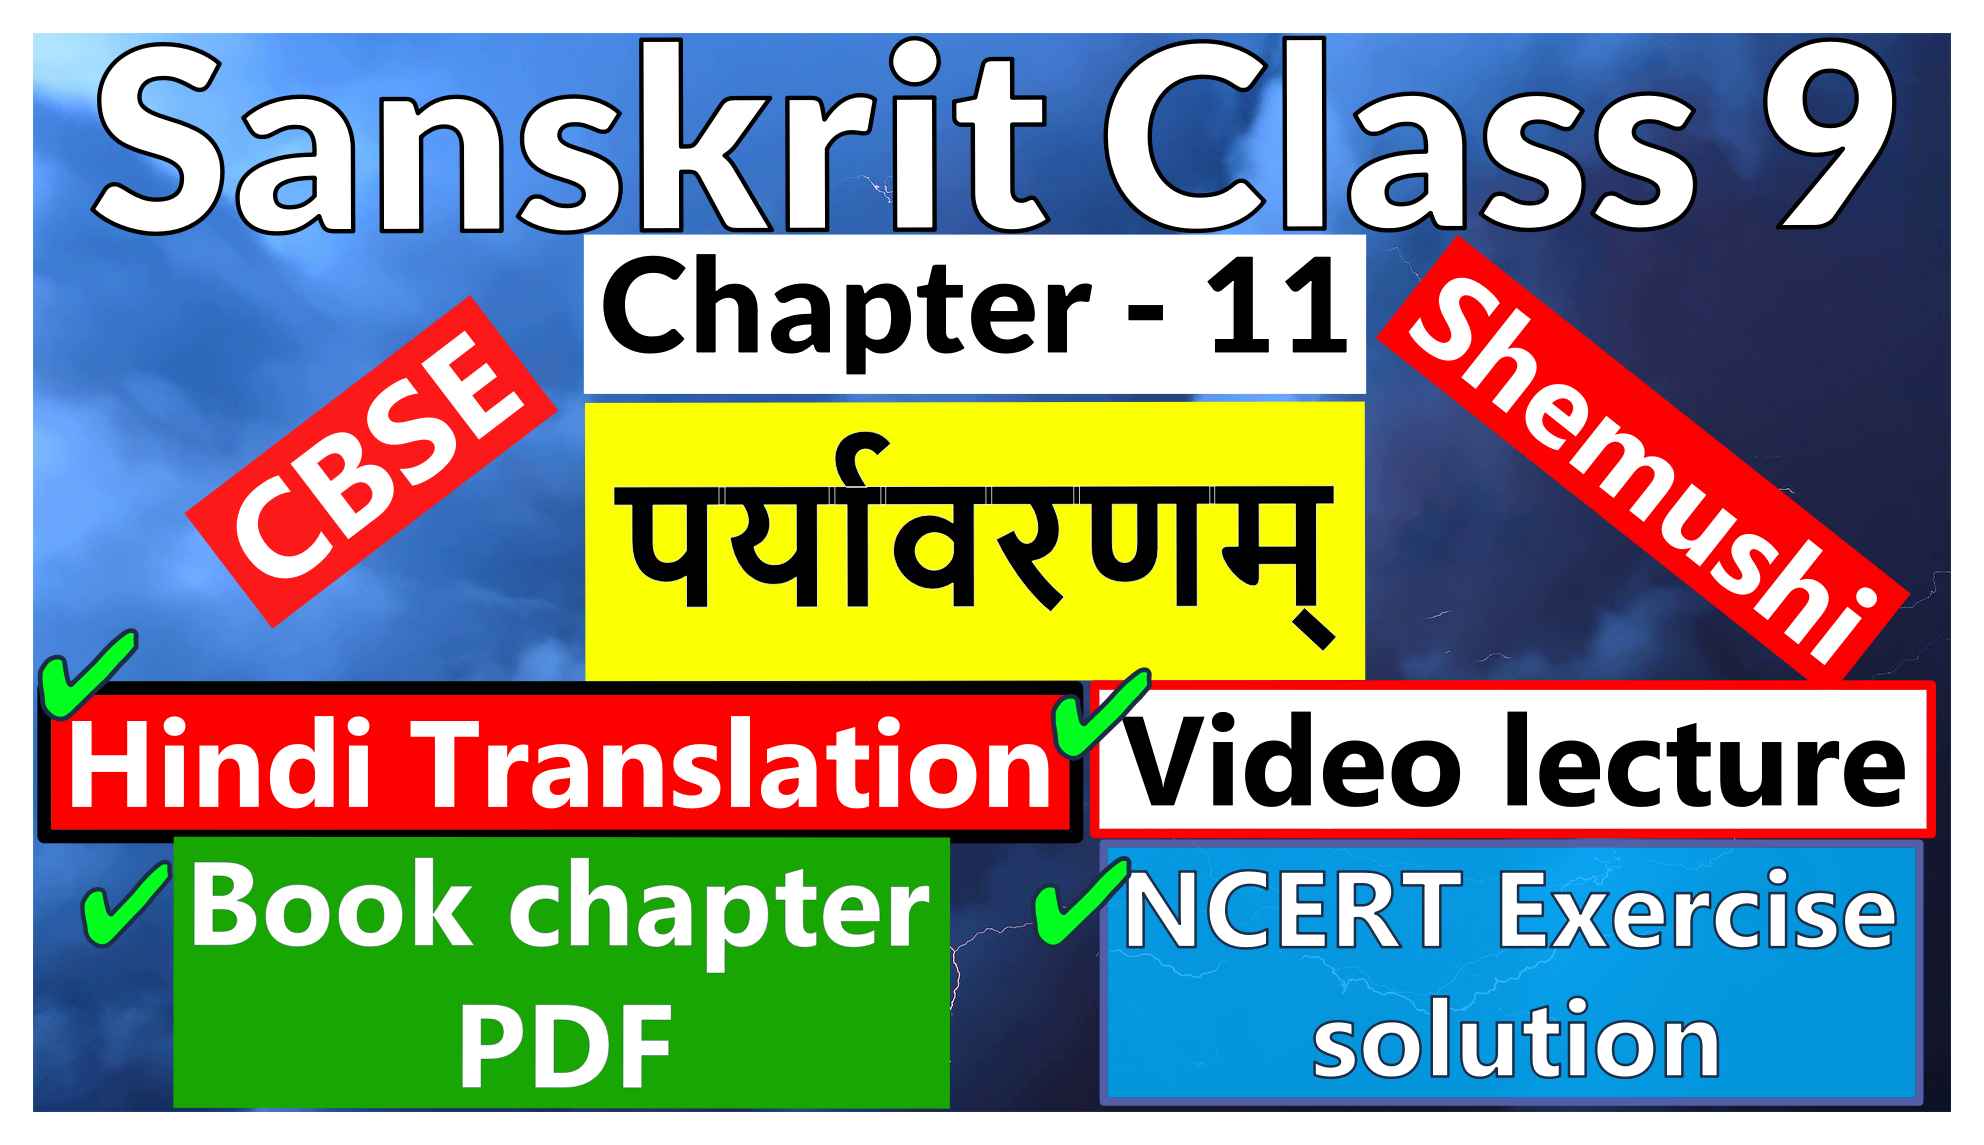 Sanskrit Class 9-Chapter 11 पर्यावरणम् - Hindi Translation, Video lecture, NCERT Exercise solution (Question-Answer), Book chapter PDF